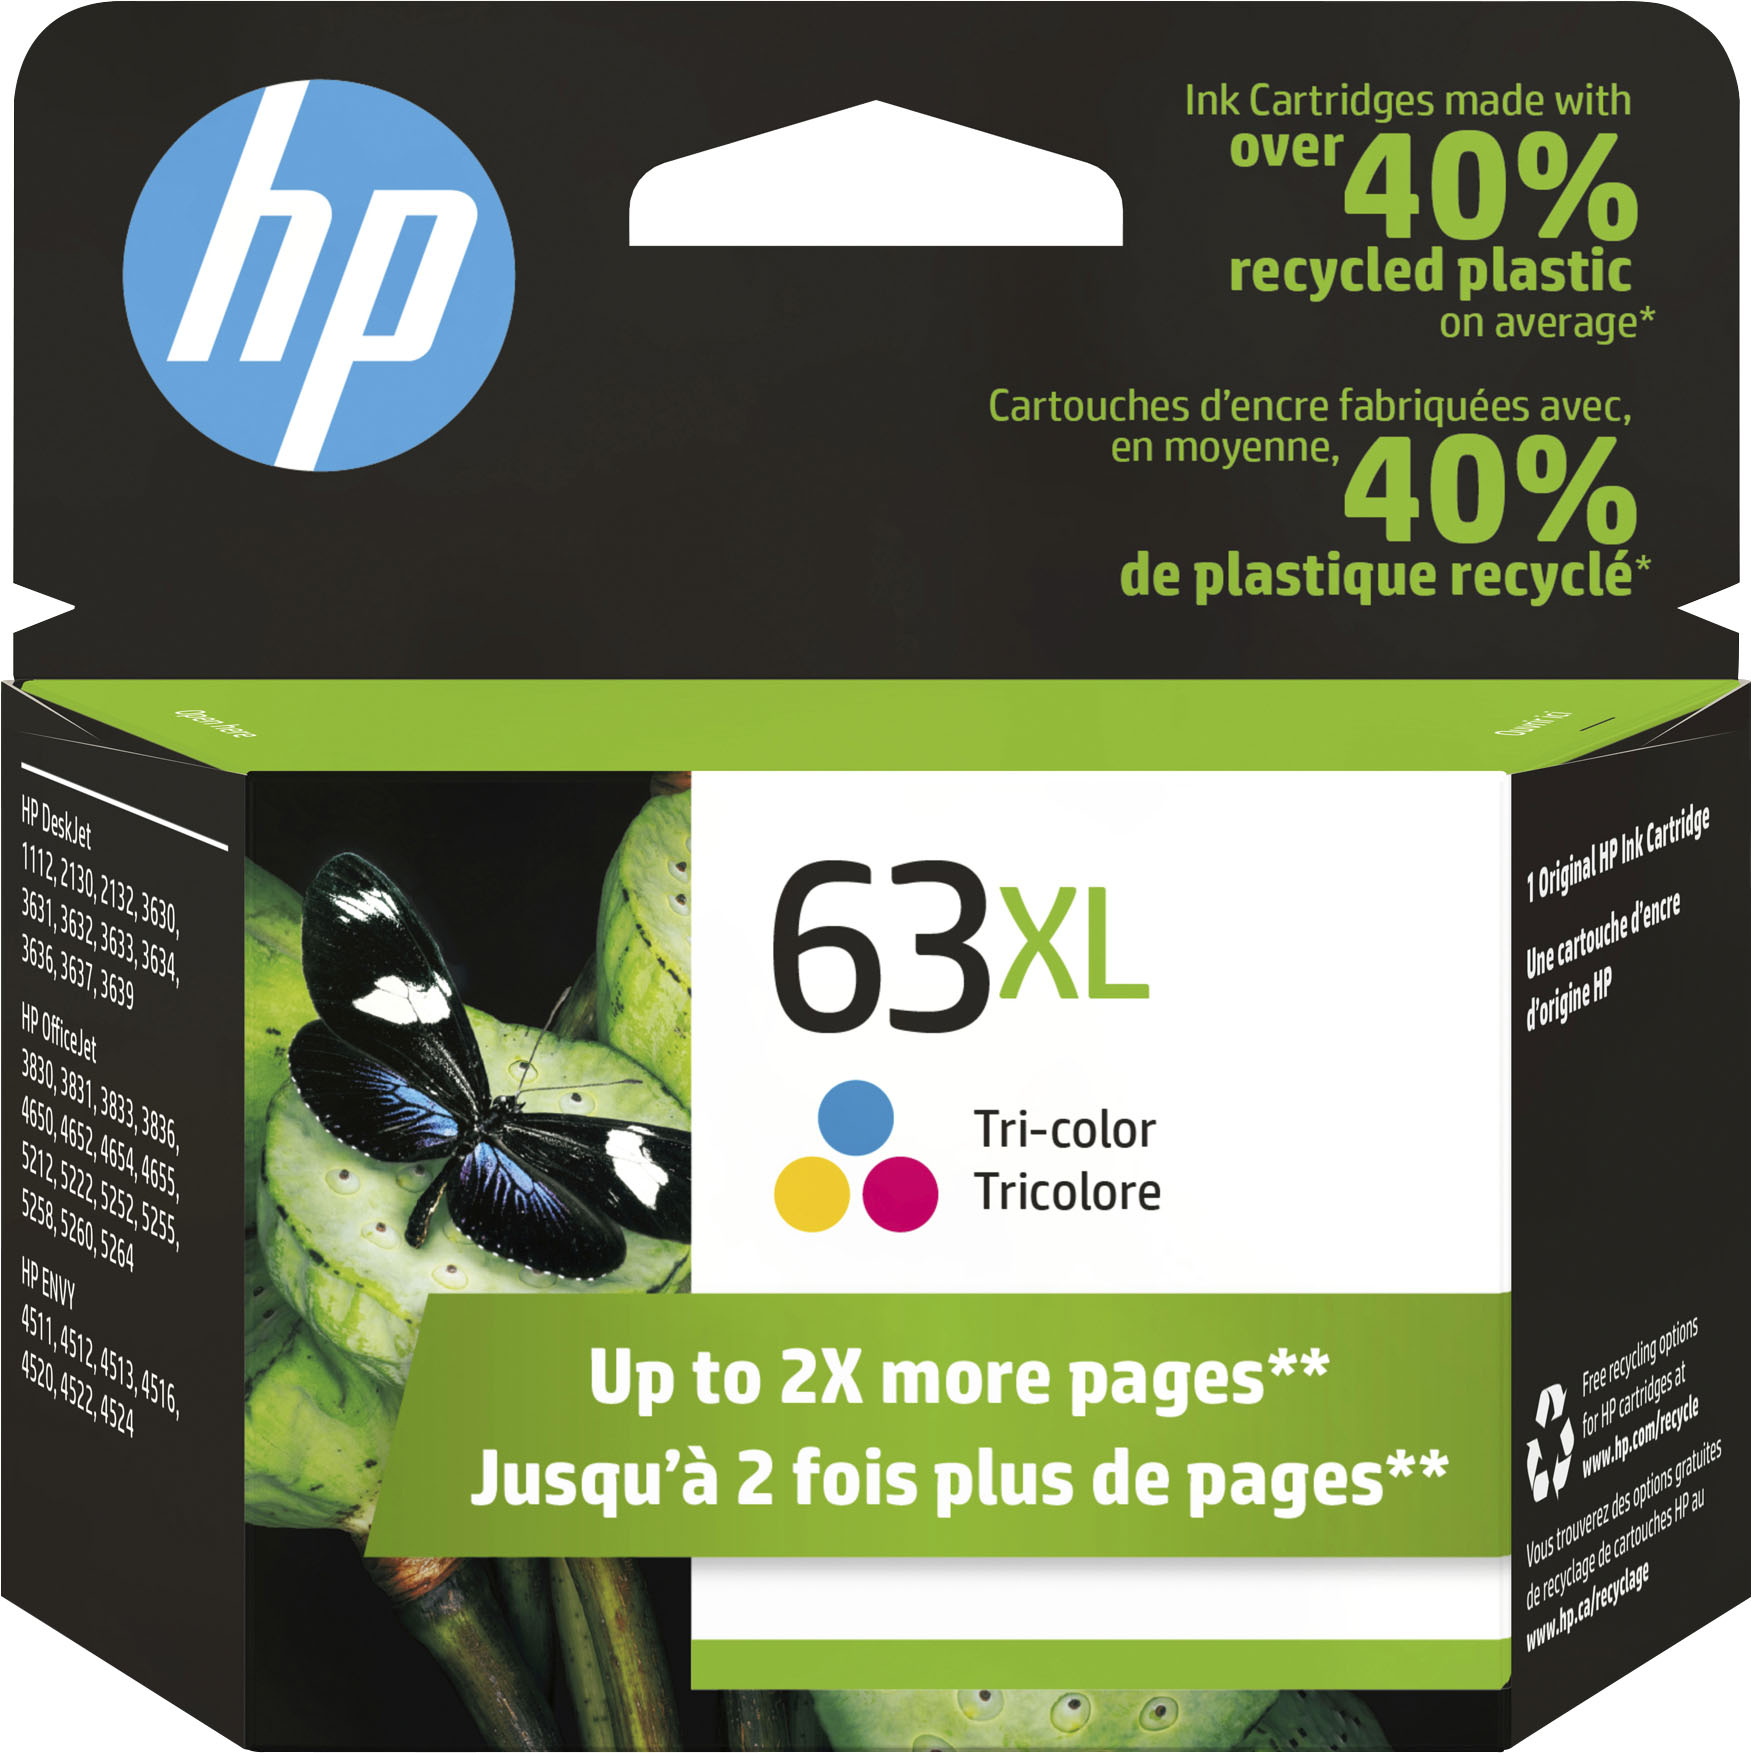 HP N°62 Couleur Instant-Ink - Recycl' Cartouche